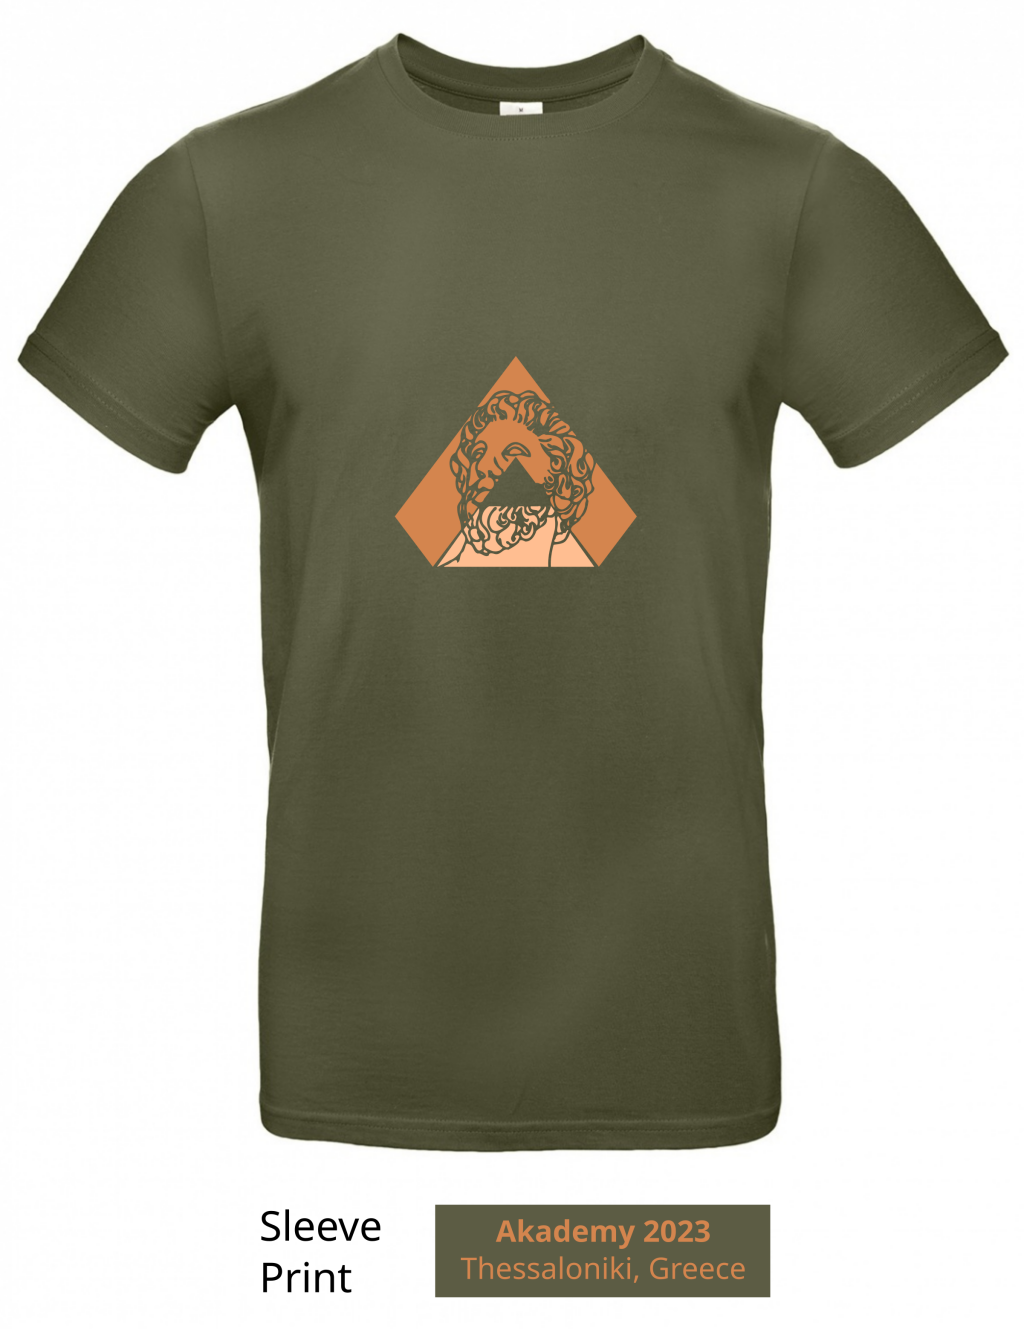 Dark grey t-shirt with outline of a head on a dark and light orange triangle